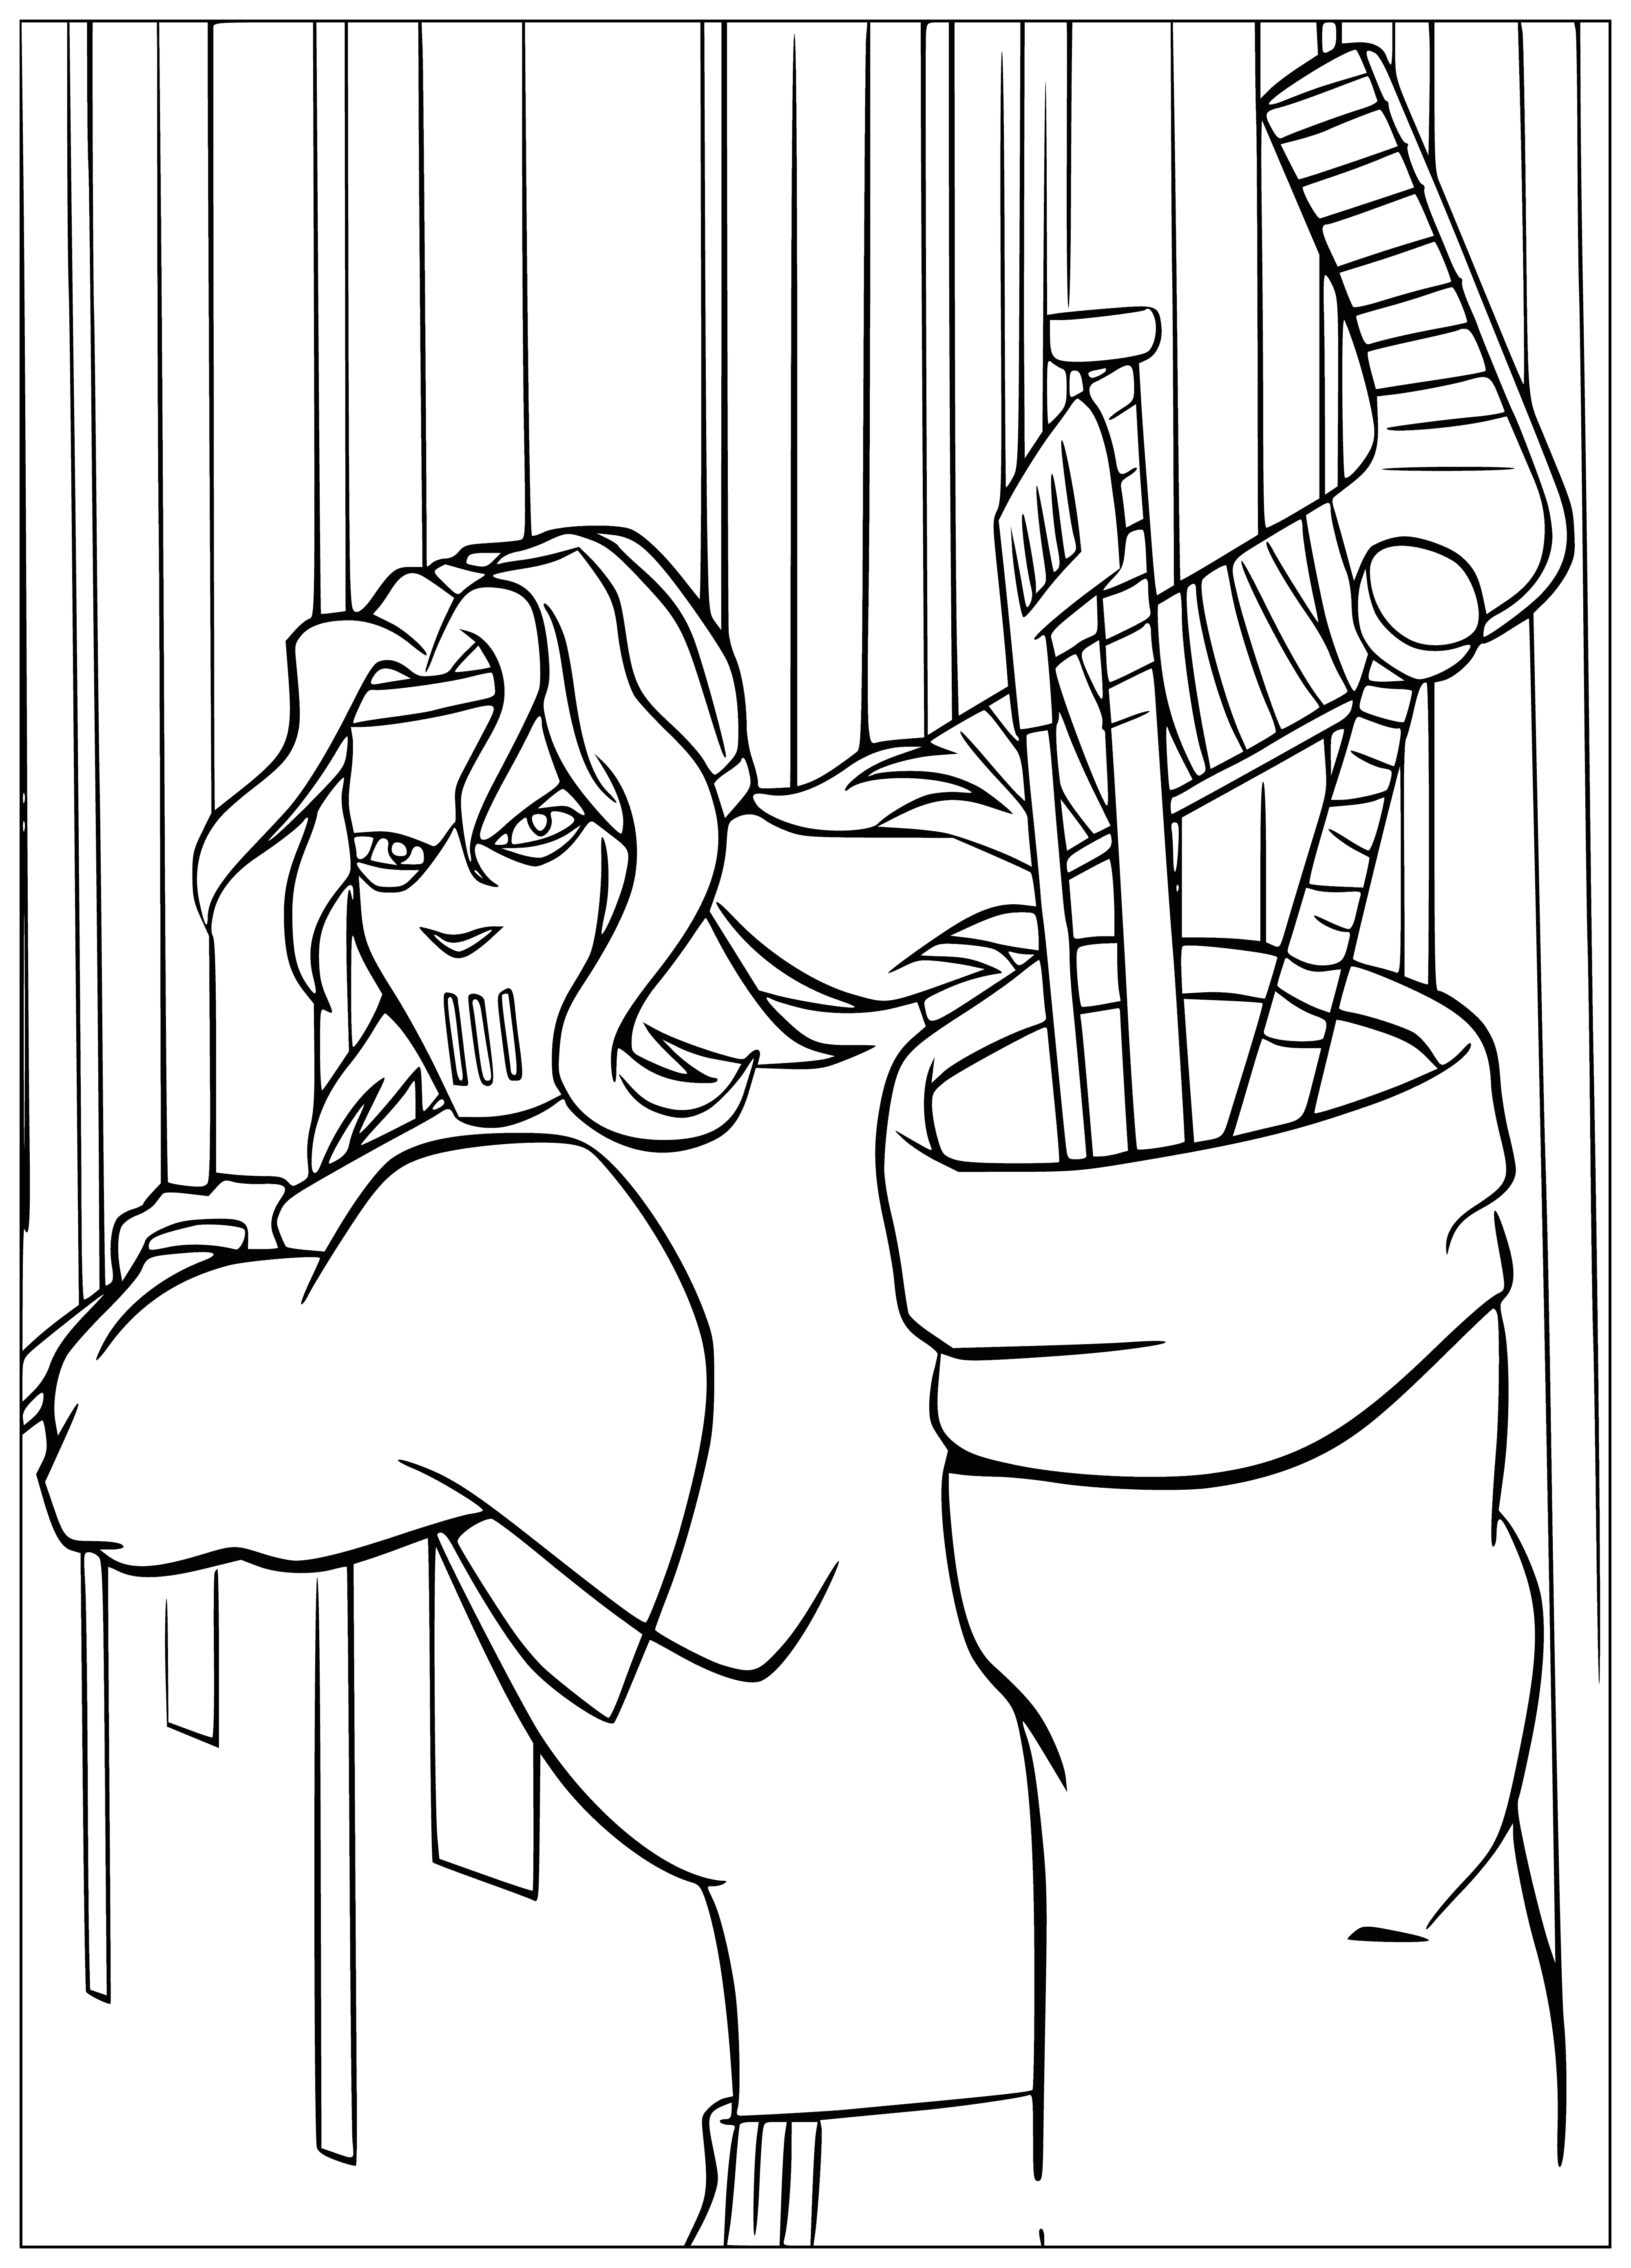 Vicious athlete coloring page